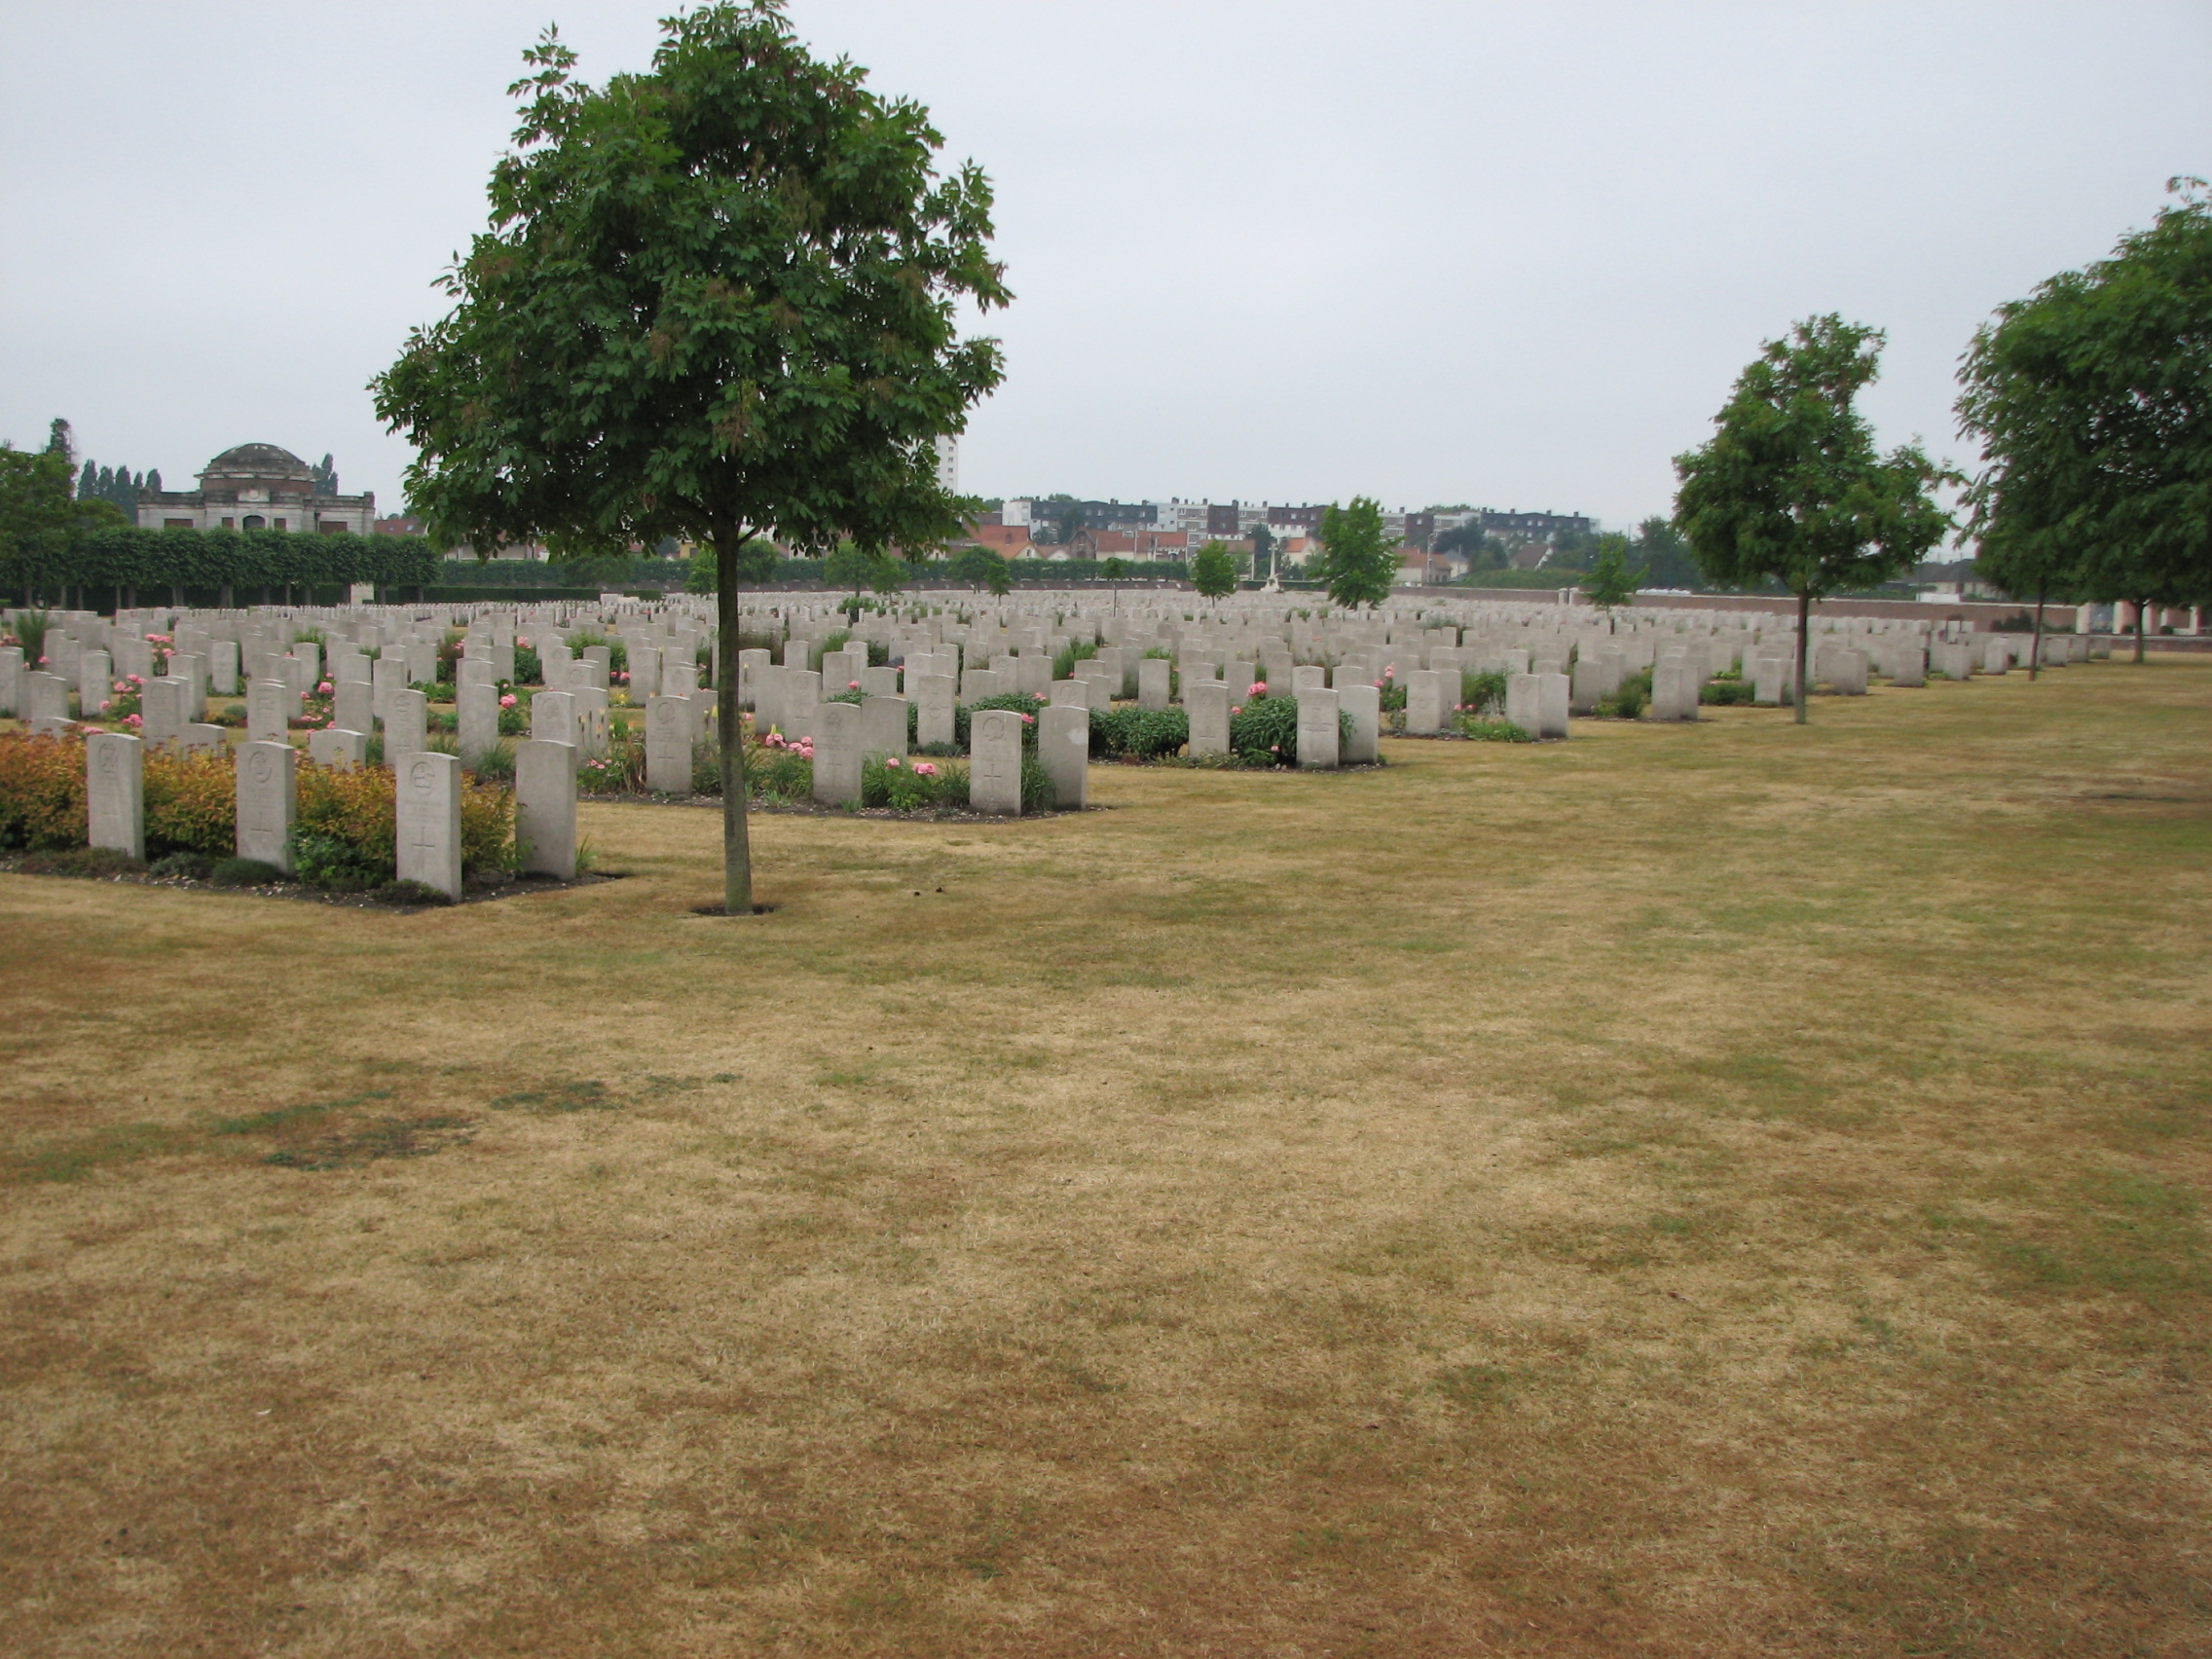 St. Sever Cemetery Extension, Rouen, Normandy, France<br>MA